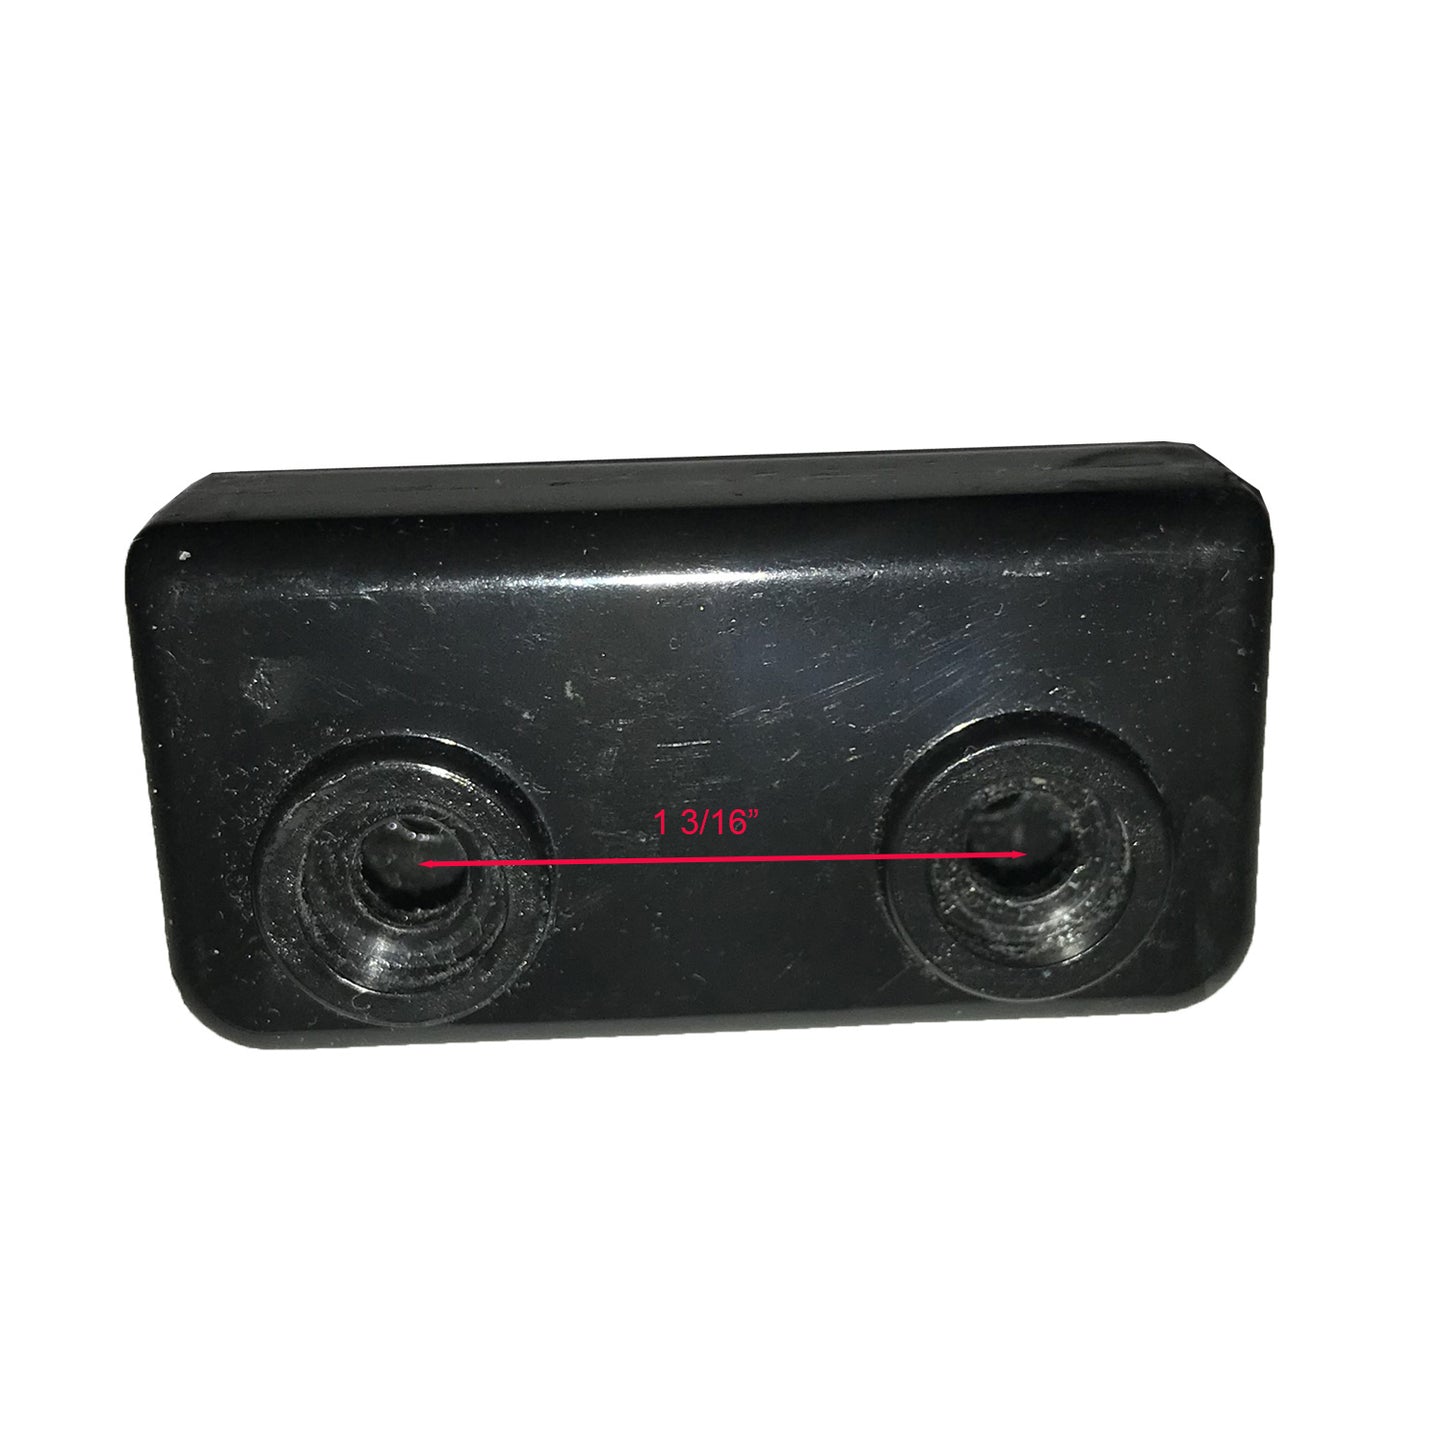 The image shows a black rectangular object with a textured surface and rounded corners. There are two circular indents, possibly screw holes, one on each end. A red line with a measurement marking "1 3/16'" spans the length between the centers of these indents, indicating their separation distance.